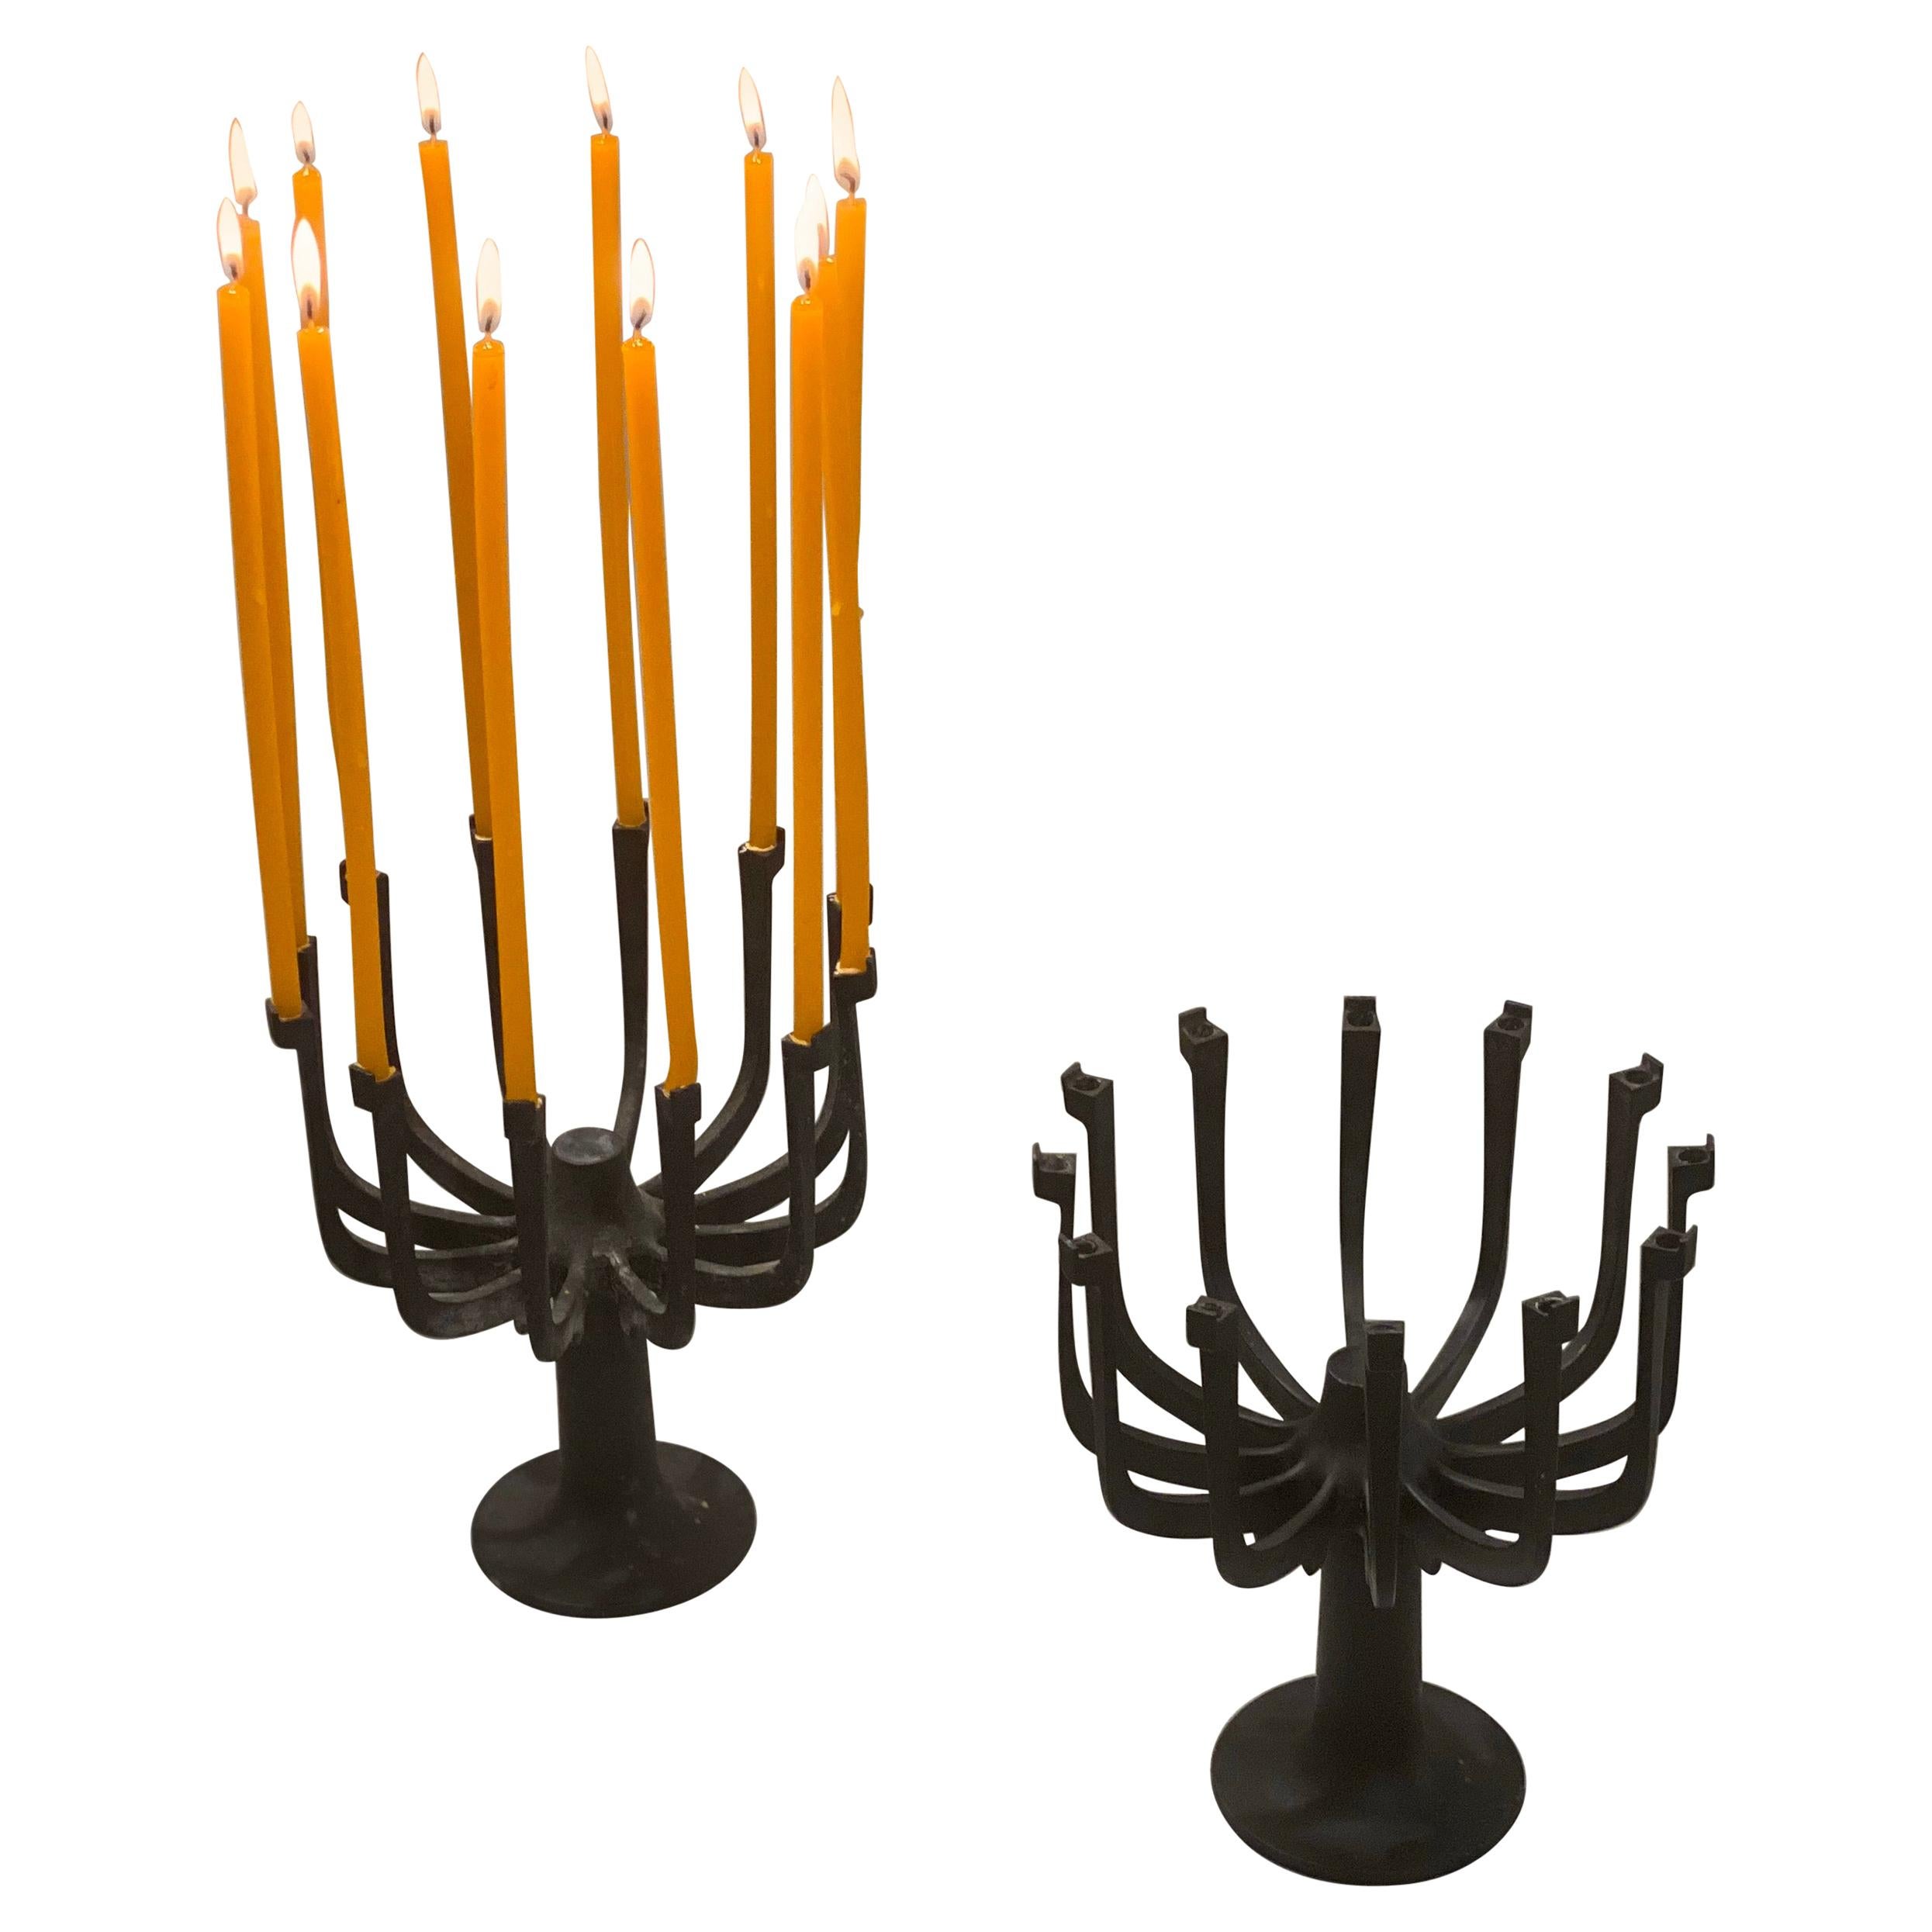 Pair of Gunnar Cyren Aglow 12 Candle Holders for Dansk, 1960s For Sale